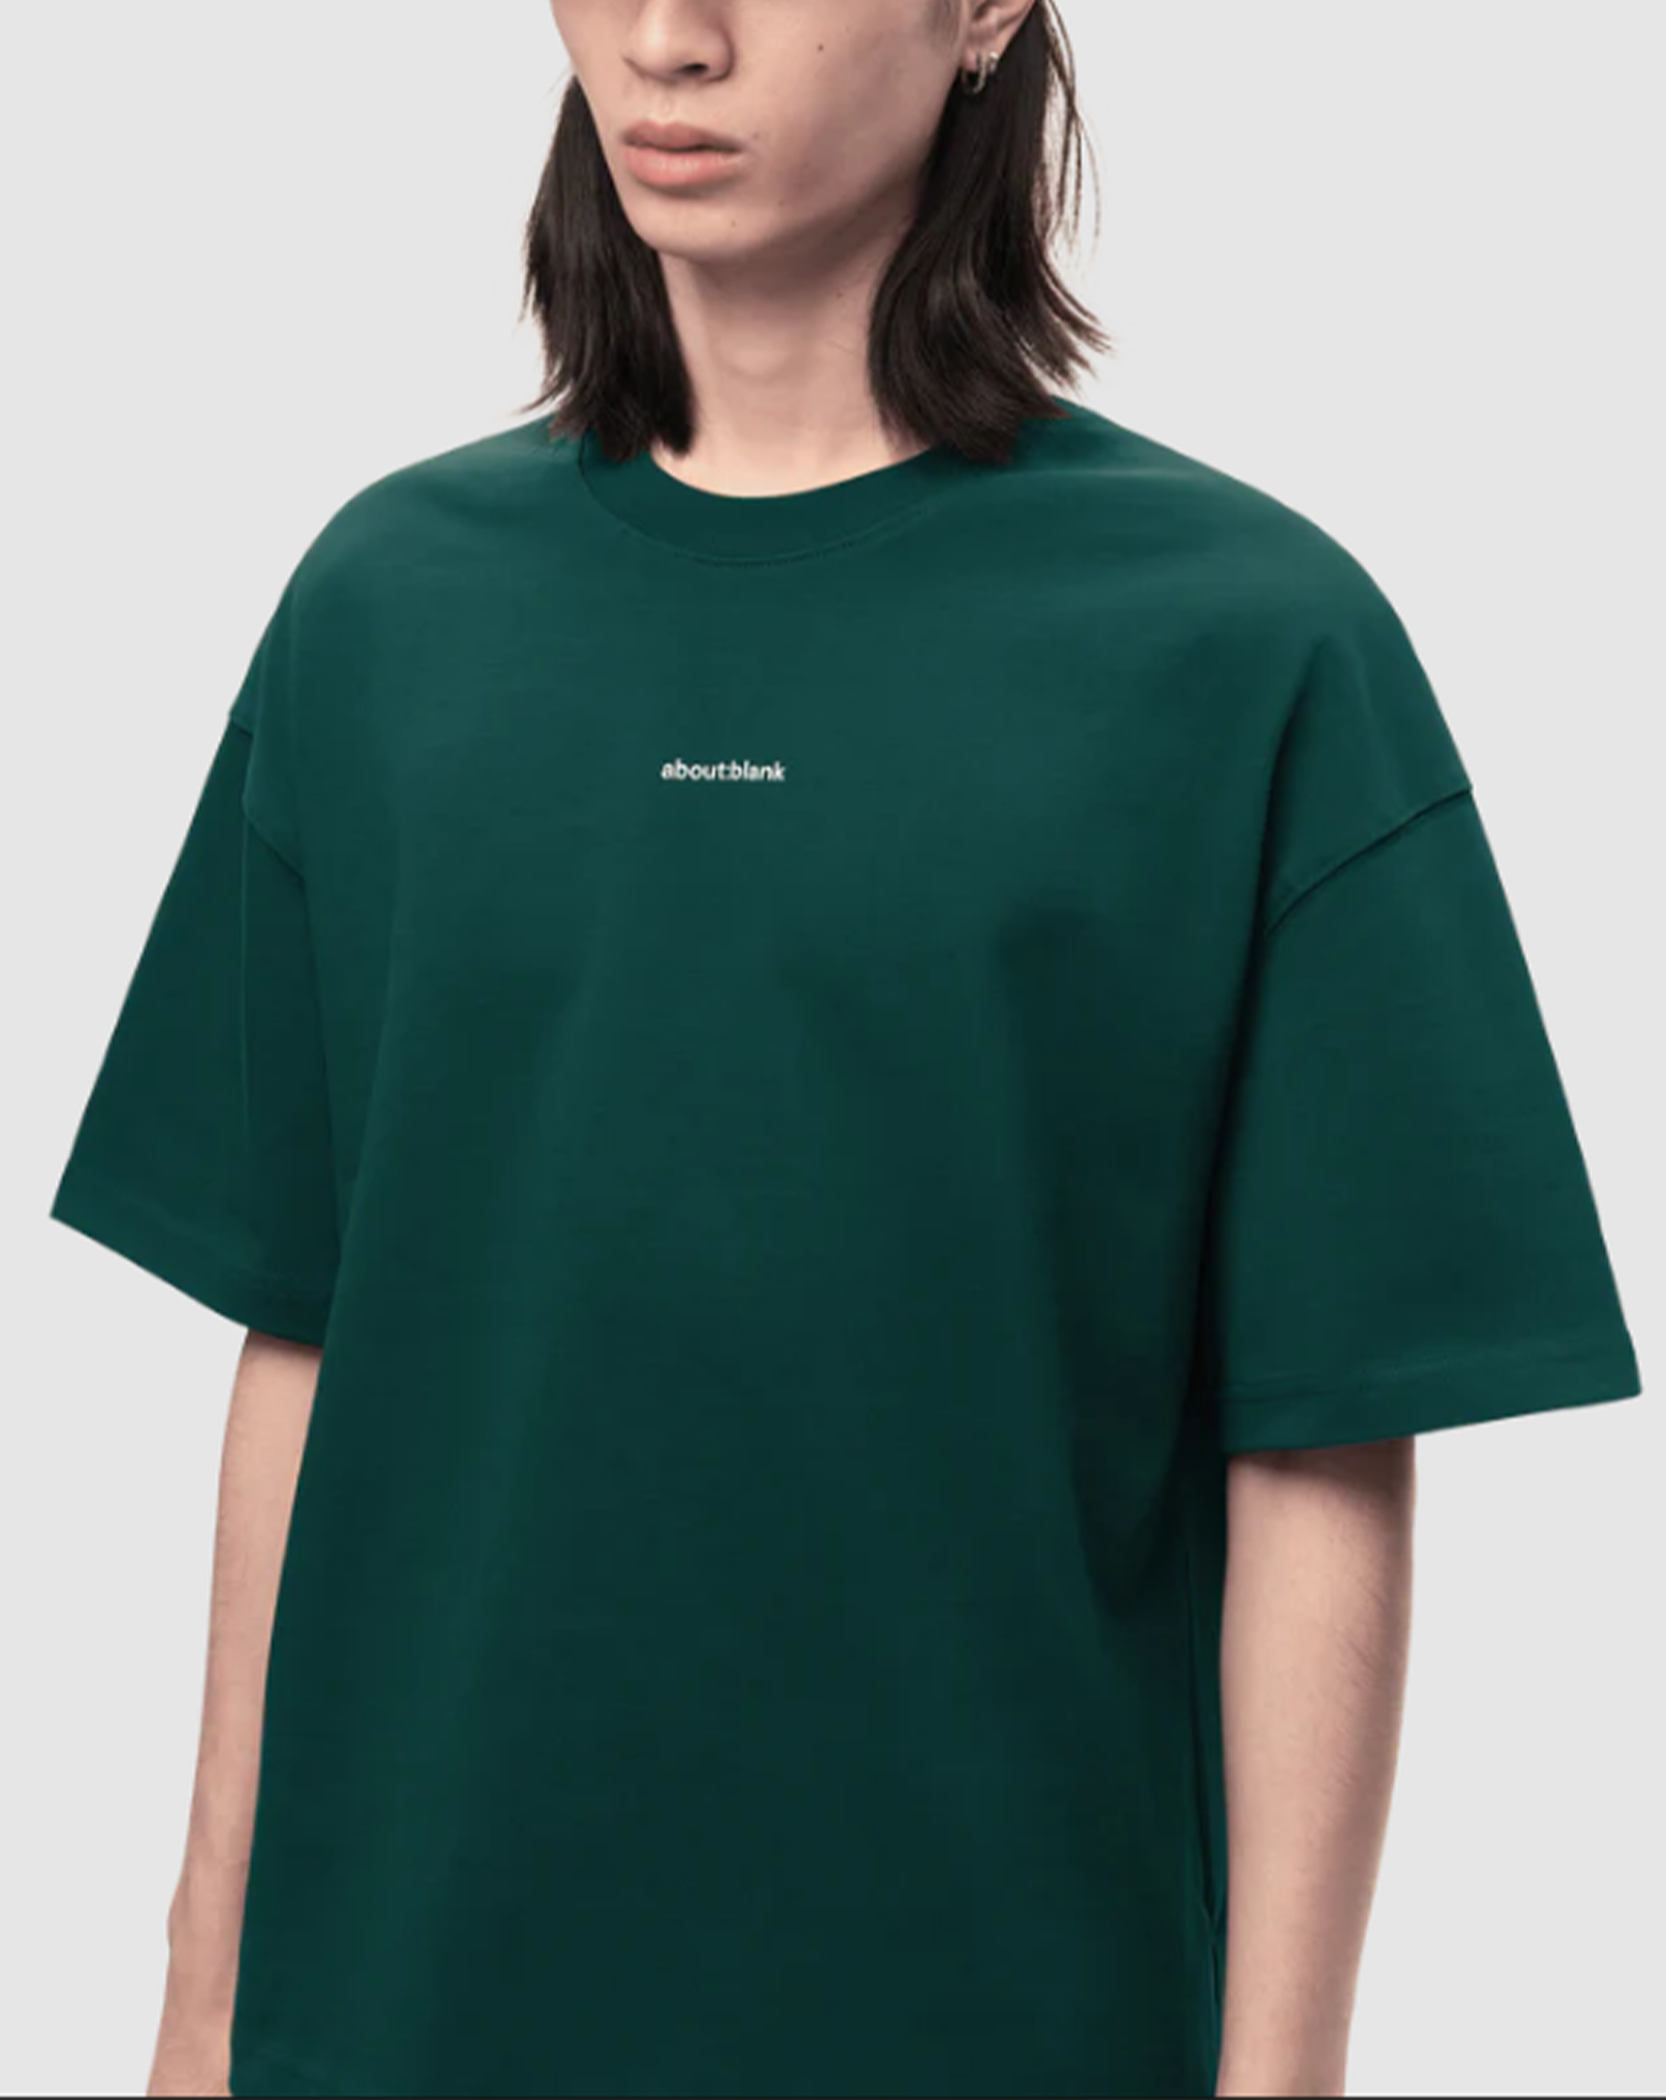 About blank - logo t-shirt epsom green